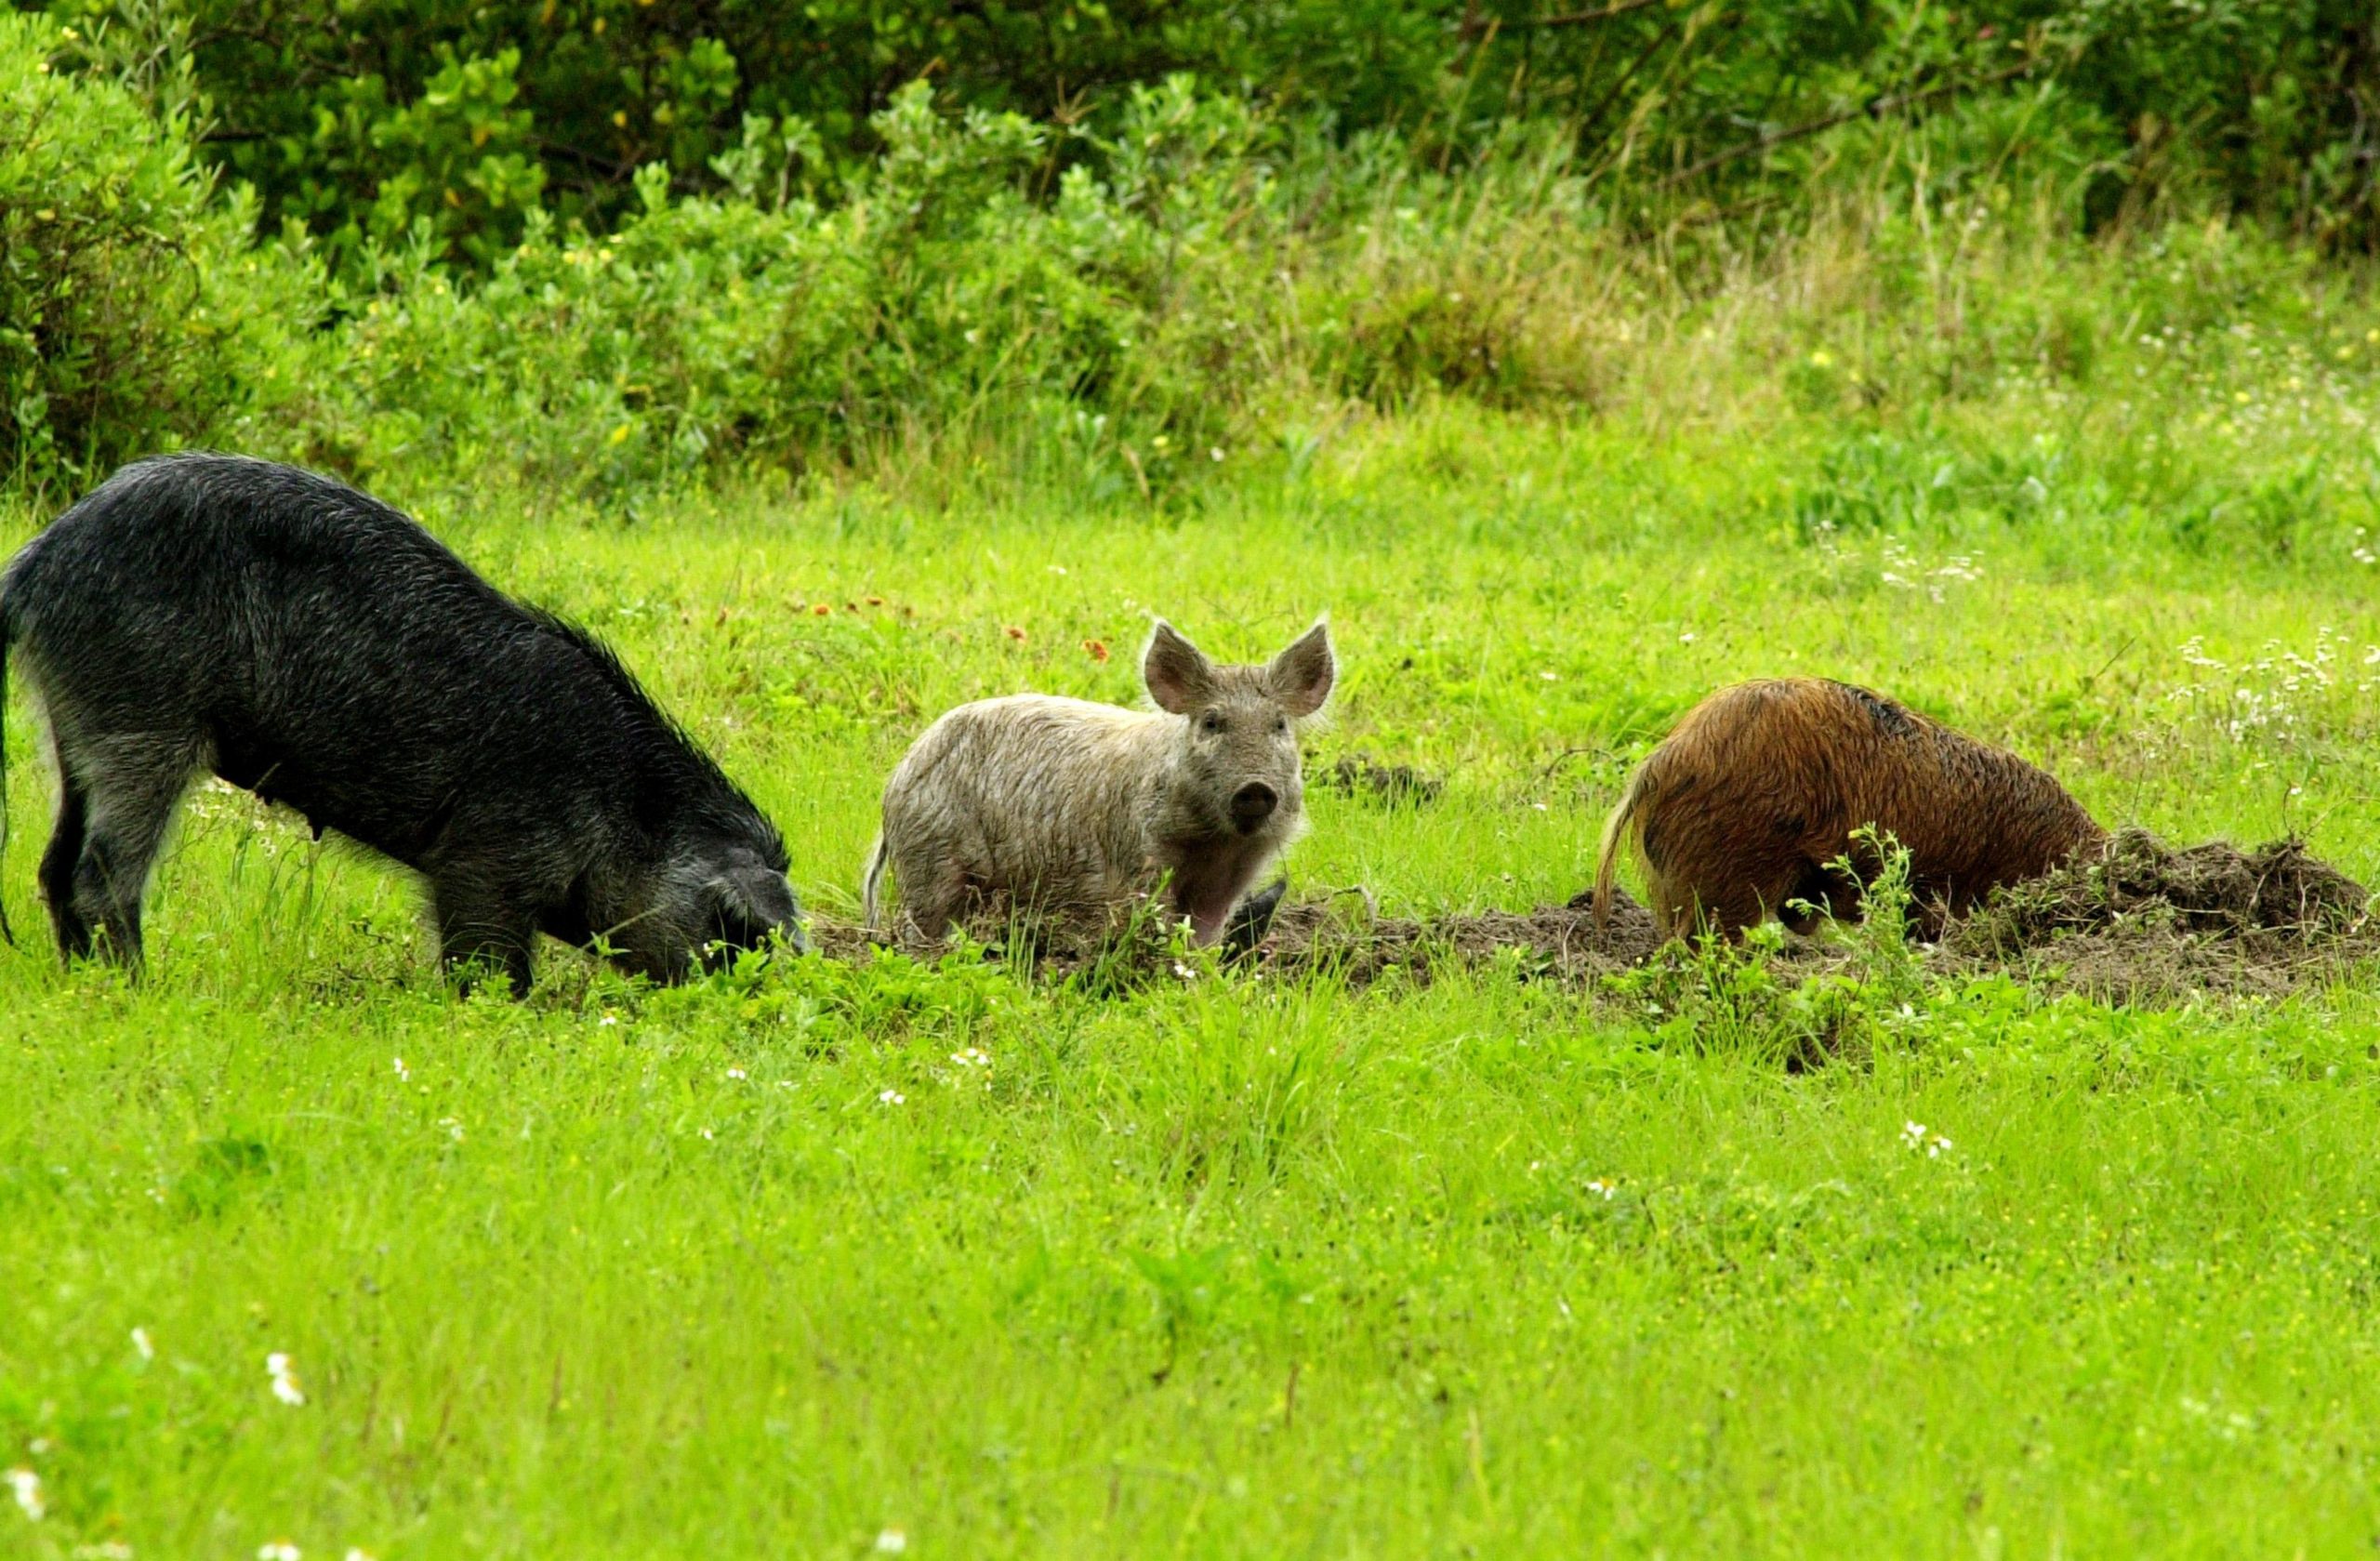 Feral swine damaging pastureland in a 2013 image courtesy of the USDA.  (Photo: Smith Collection/Gado, Getty Images)